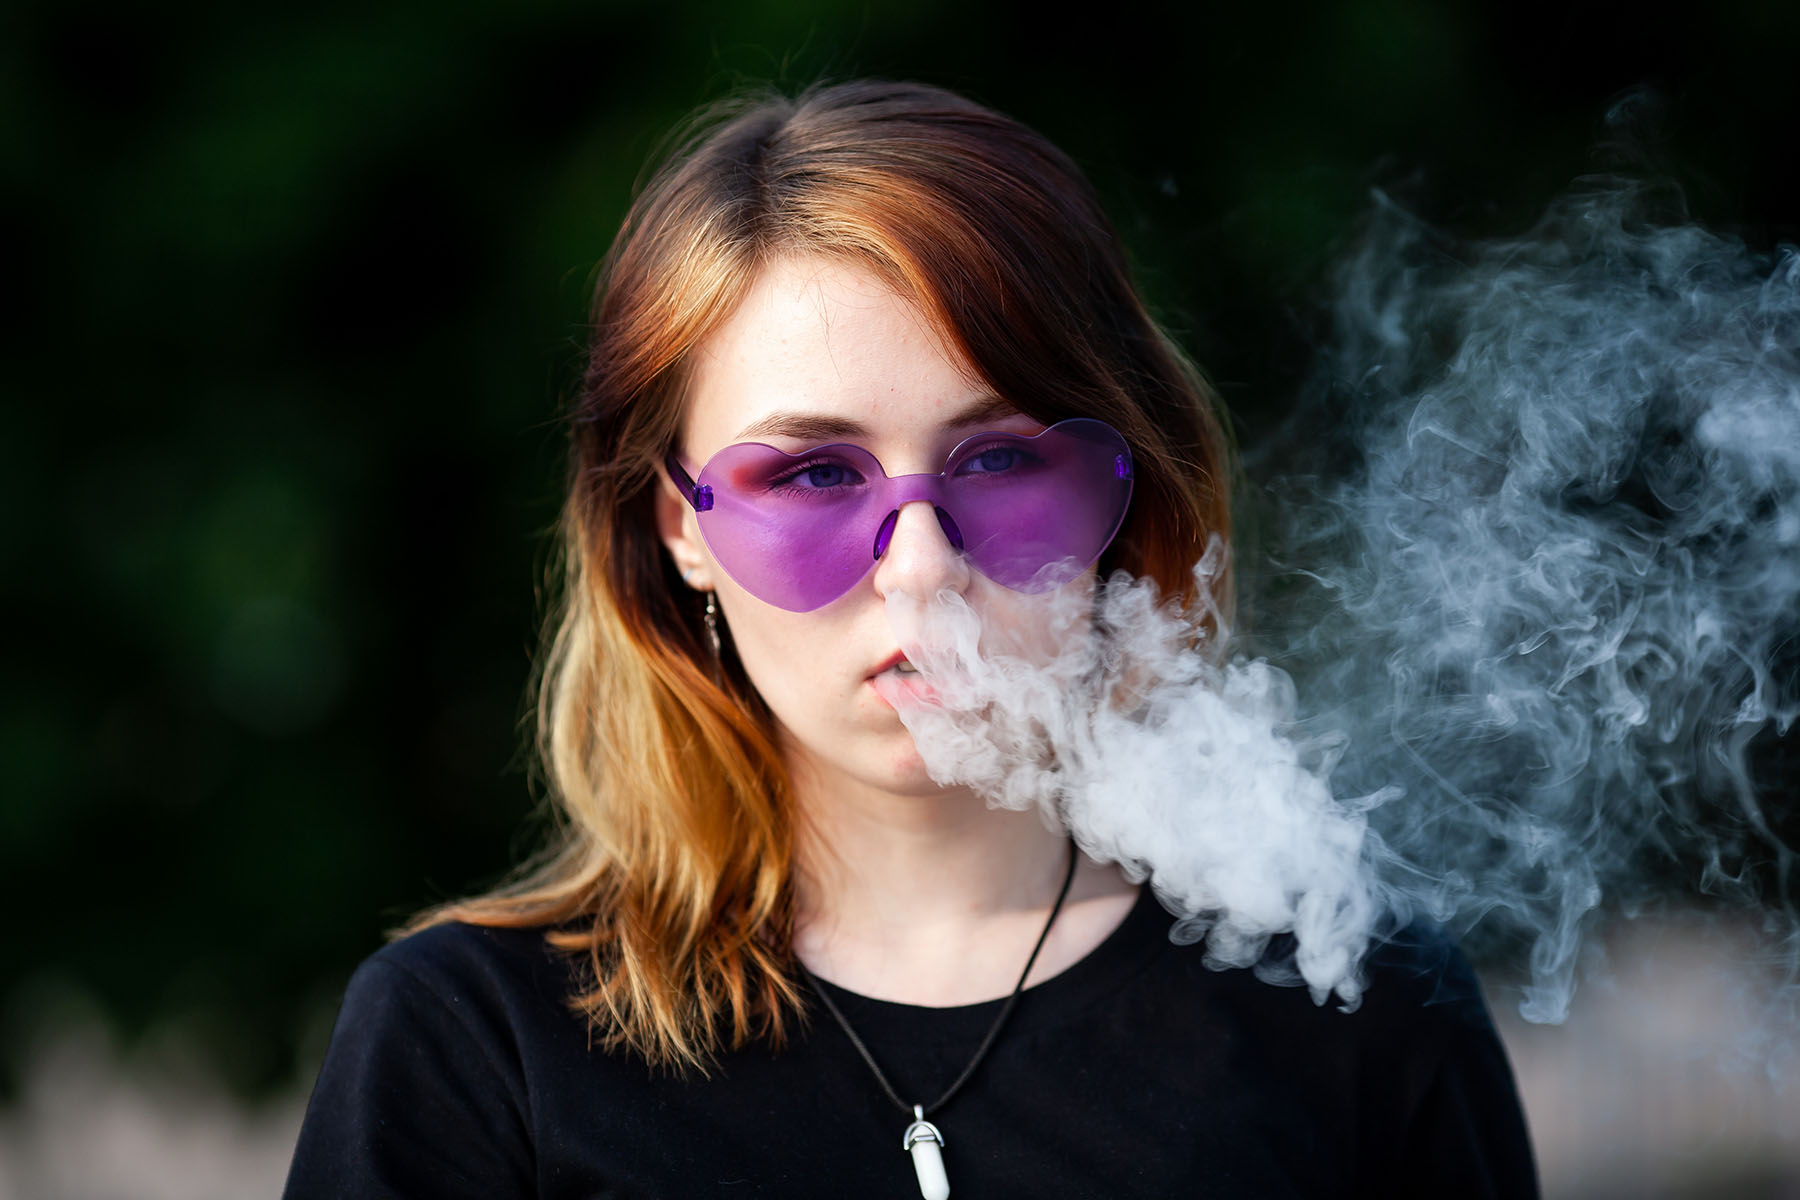 Teen girl with purple glasses vapes